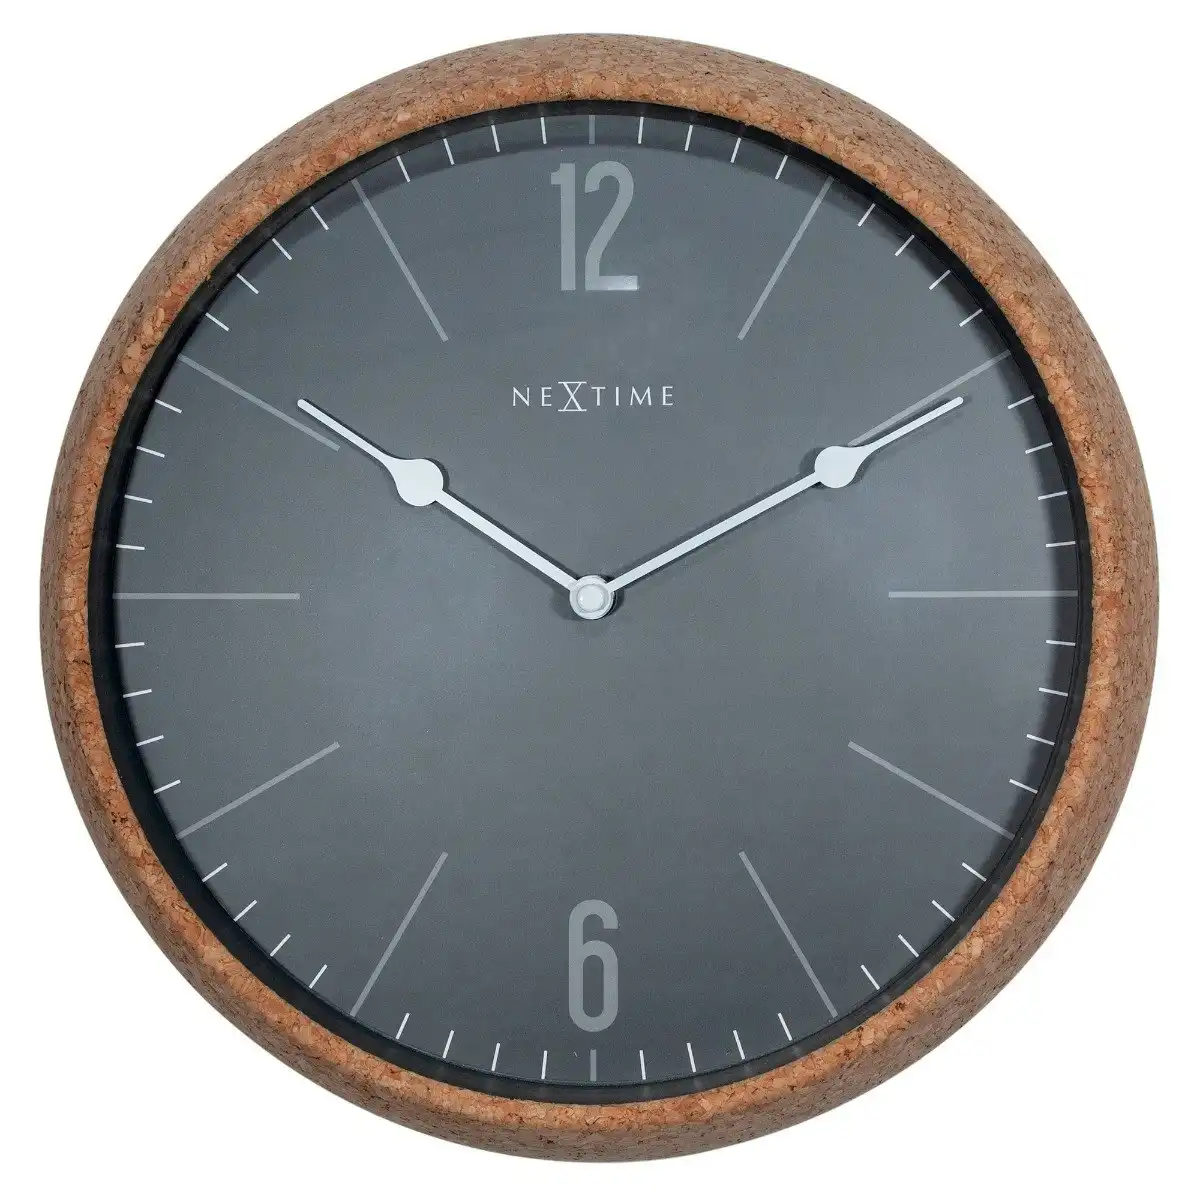 NeXtime 30cm Cork Silent Battery Operated Round Home/Office Decor Wall Clock GRY